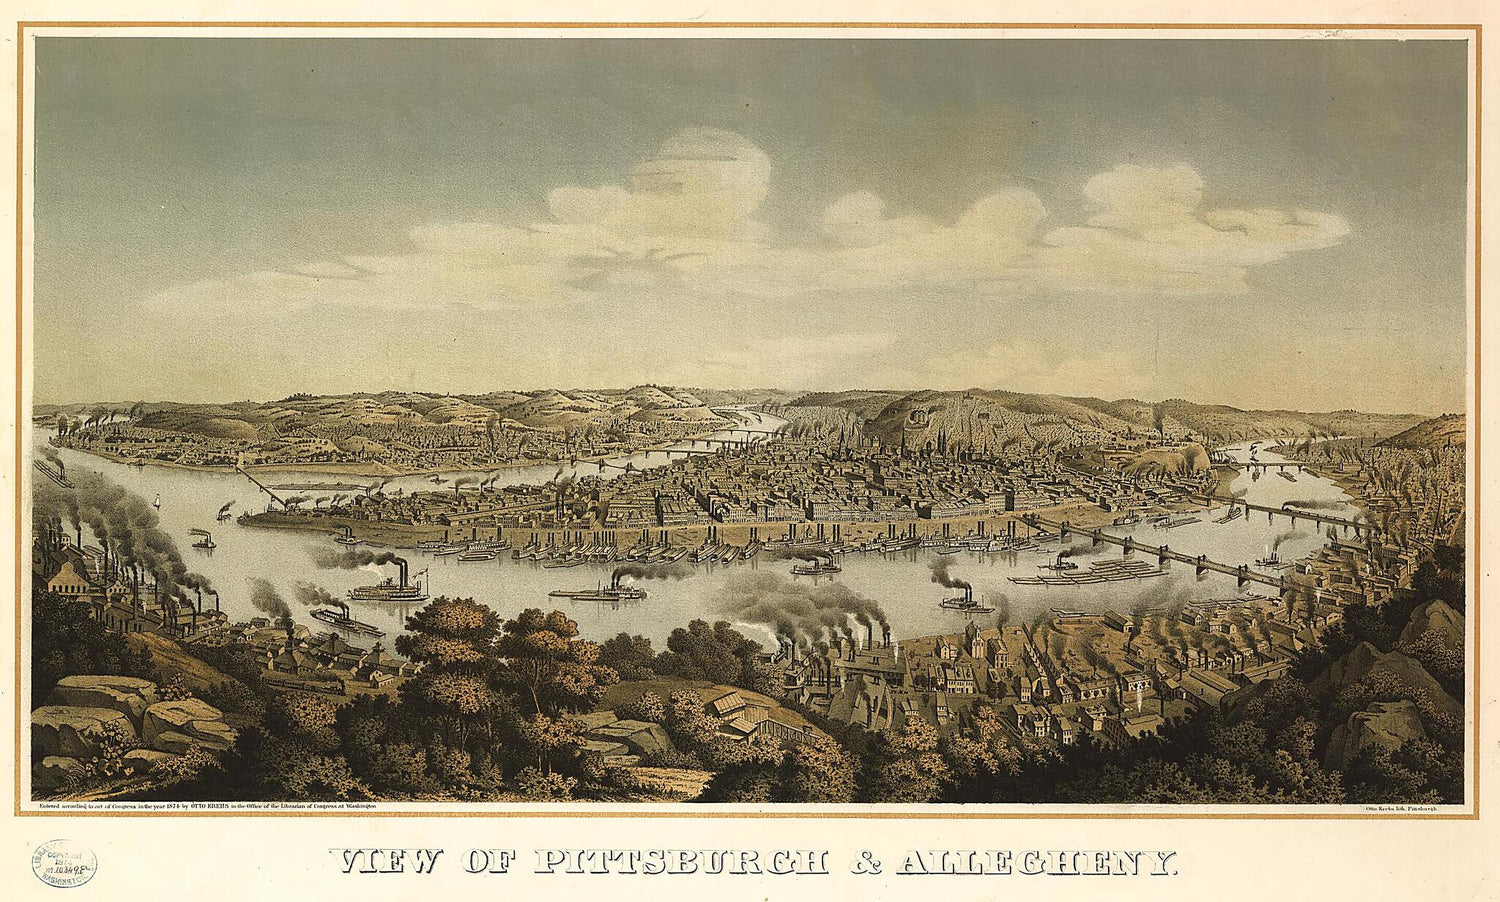 This old map of View of Pittsburgh &amp; Allegheny / Otto Krebs Lith., Pittsburgh from 1874 was created by Otto Krebs in 1874